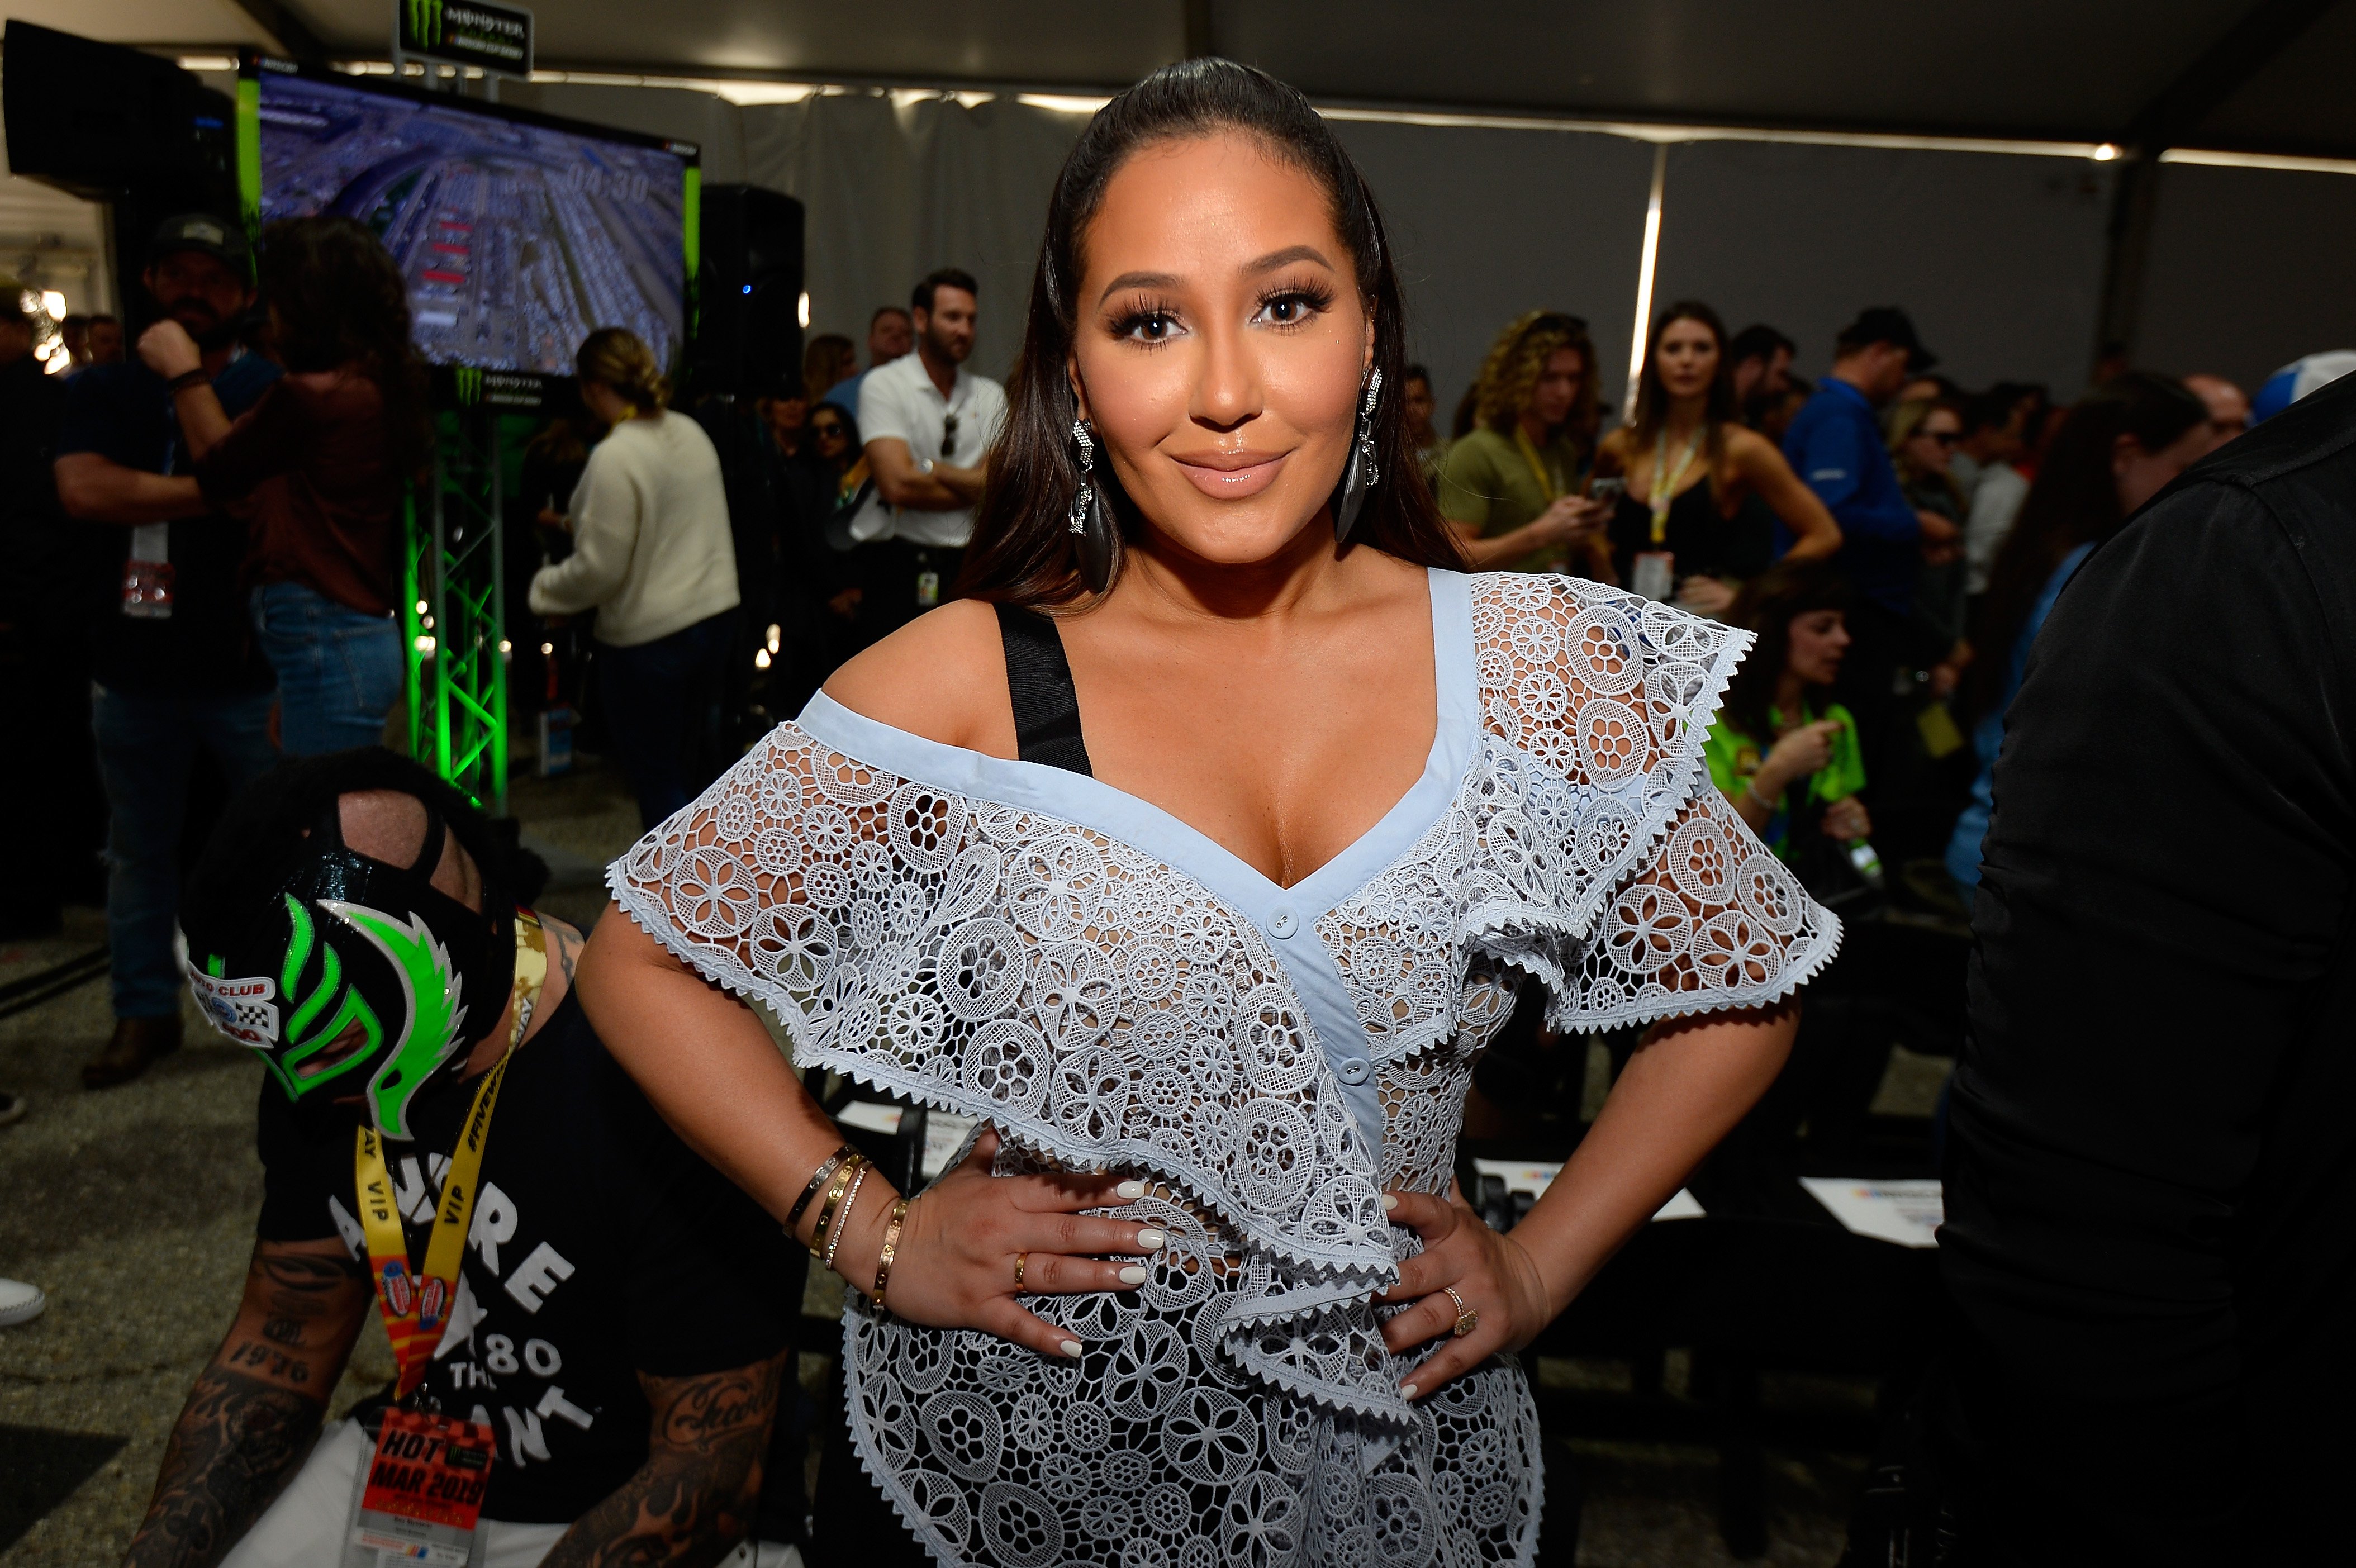  Adrienne Houghton attends the driver's meeting prior to the Monster Energy NASCAR Cup Series Auto Club 400 at Auto Club Speedway on March 17, 2019 | Photo: GettyImages